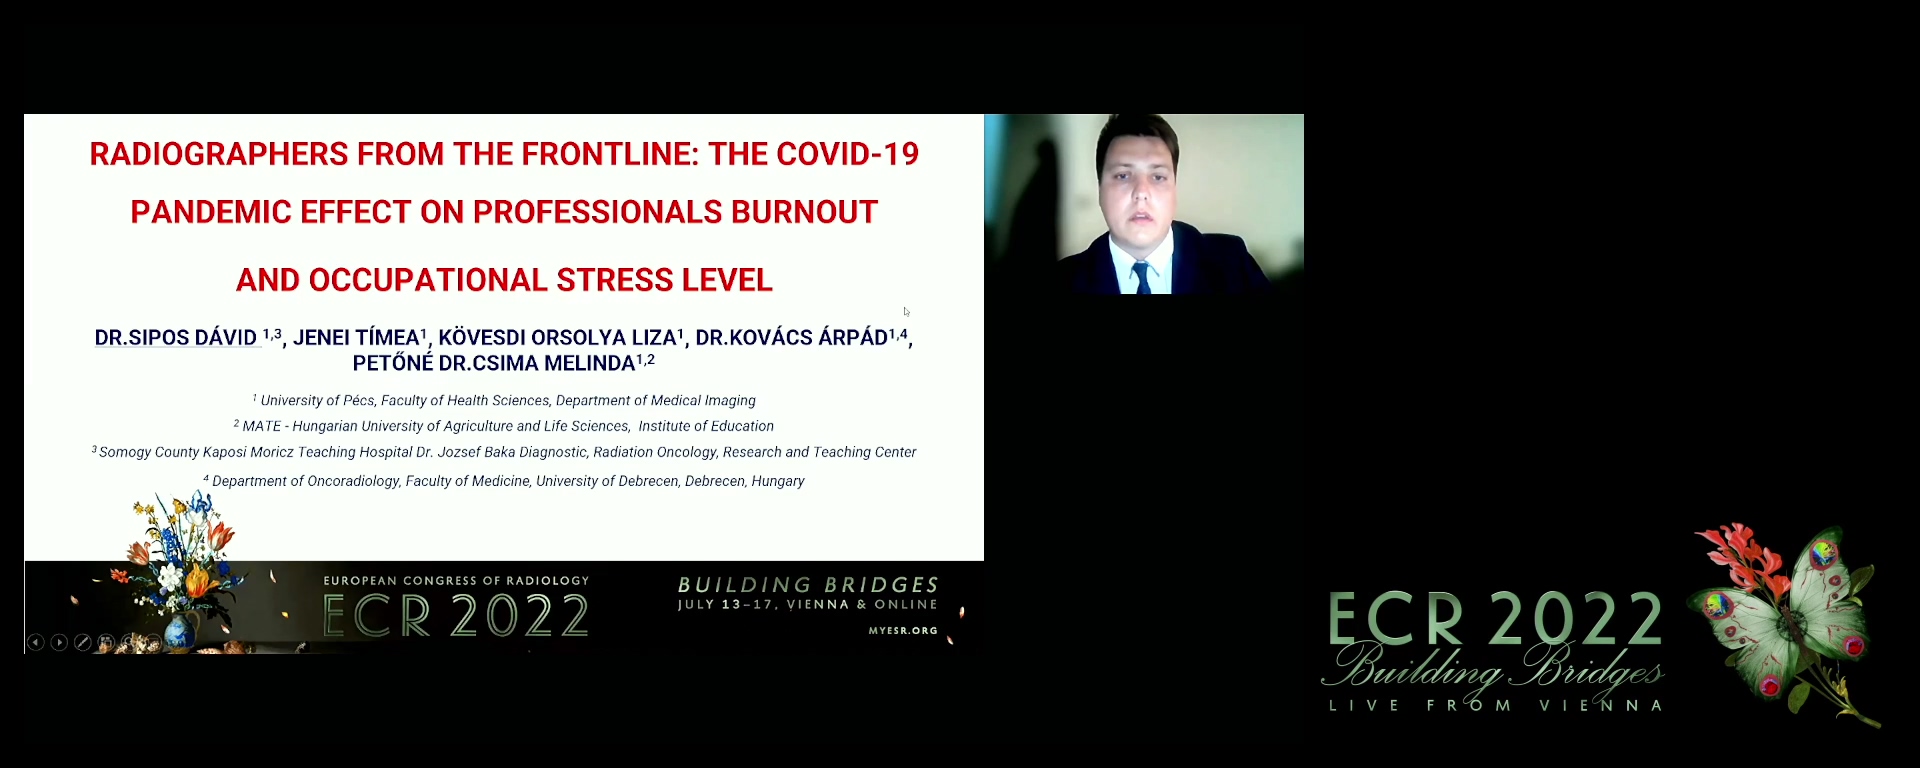 Radiographers from the frontline: the COVID-19 pandemic's effect on professionals' burnout and occupational stress level - Dávid Sipos, Kaposvár / HU